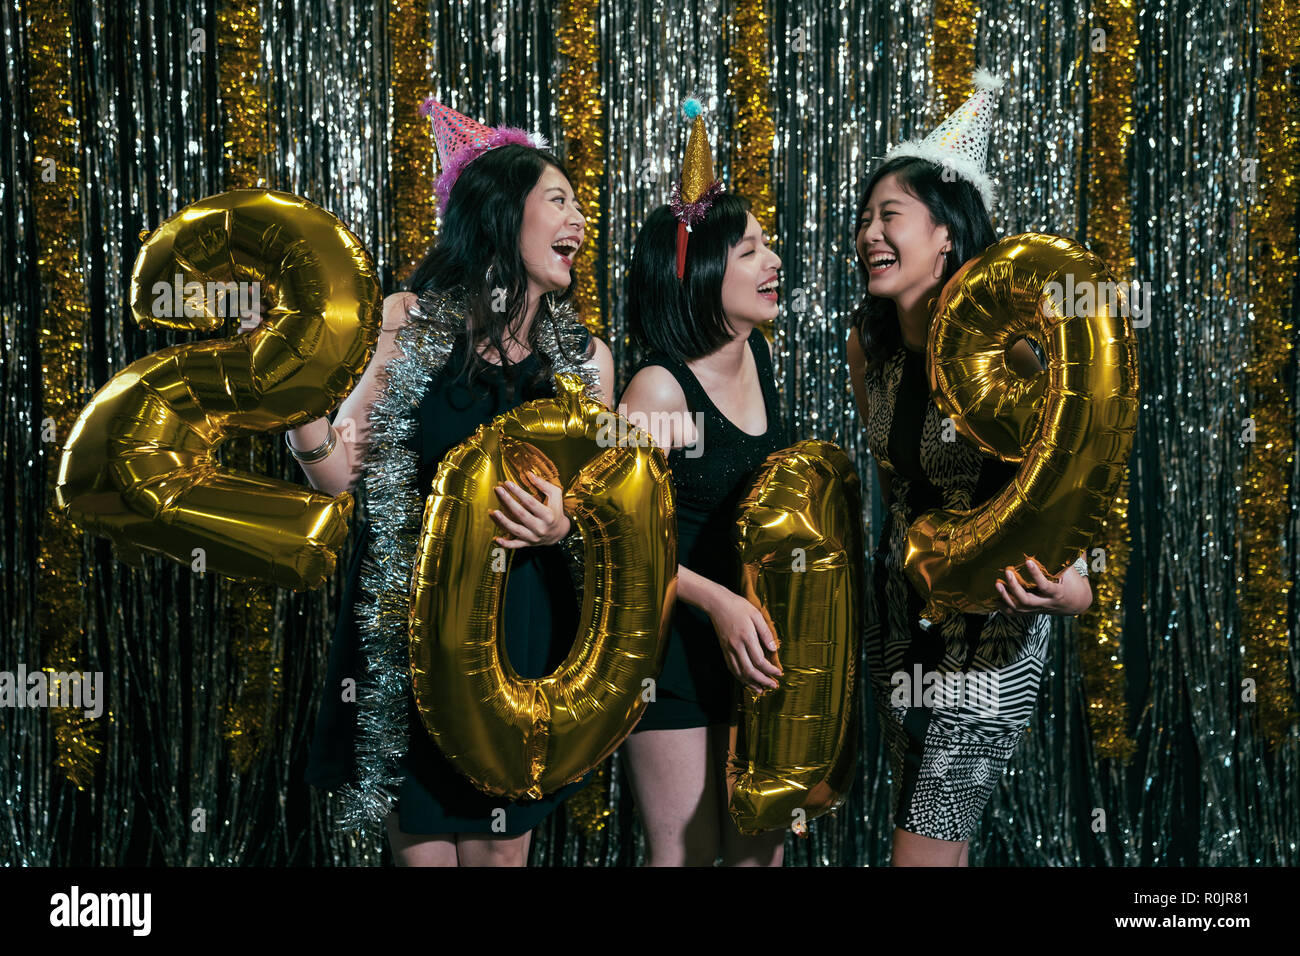 Celebrating New Year party group of cheerful young girls wearing dresses carrying gold colored numbers 2019 balloon. attractive beautiful ladies chatt Stock Photo